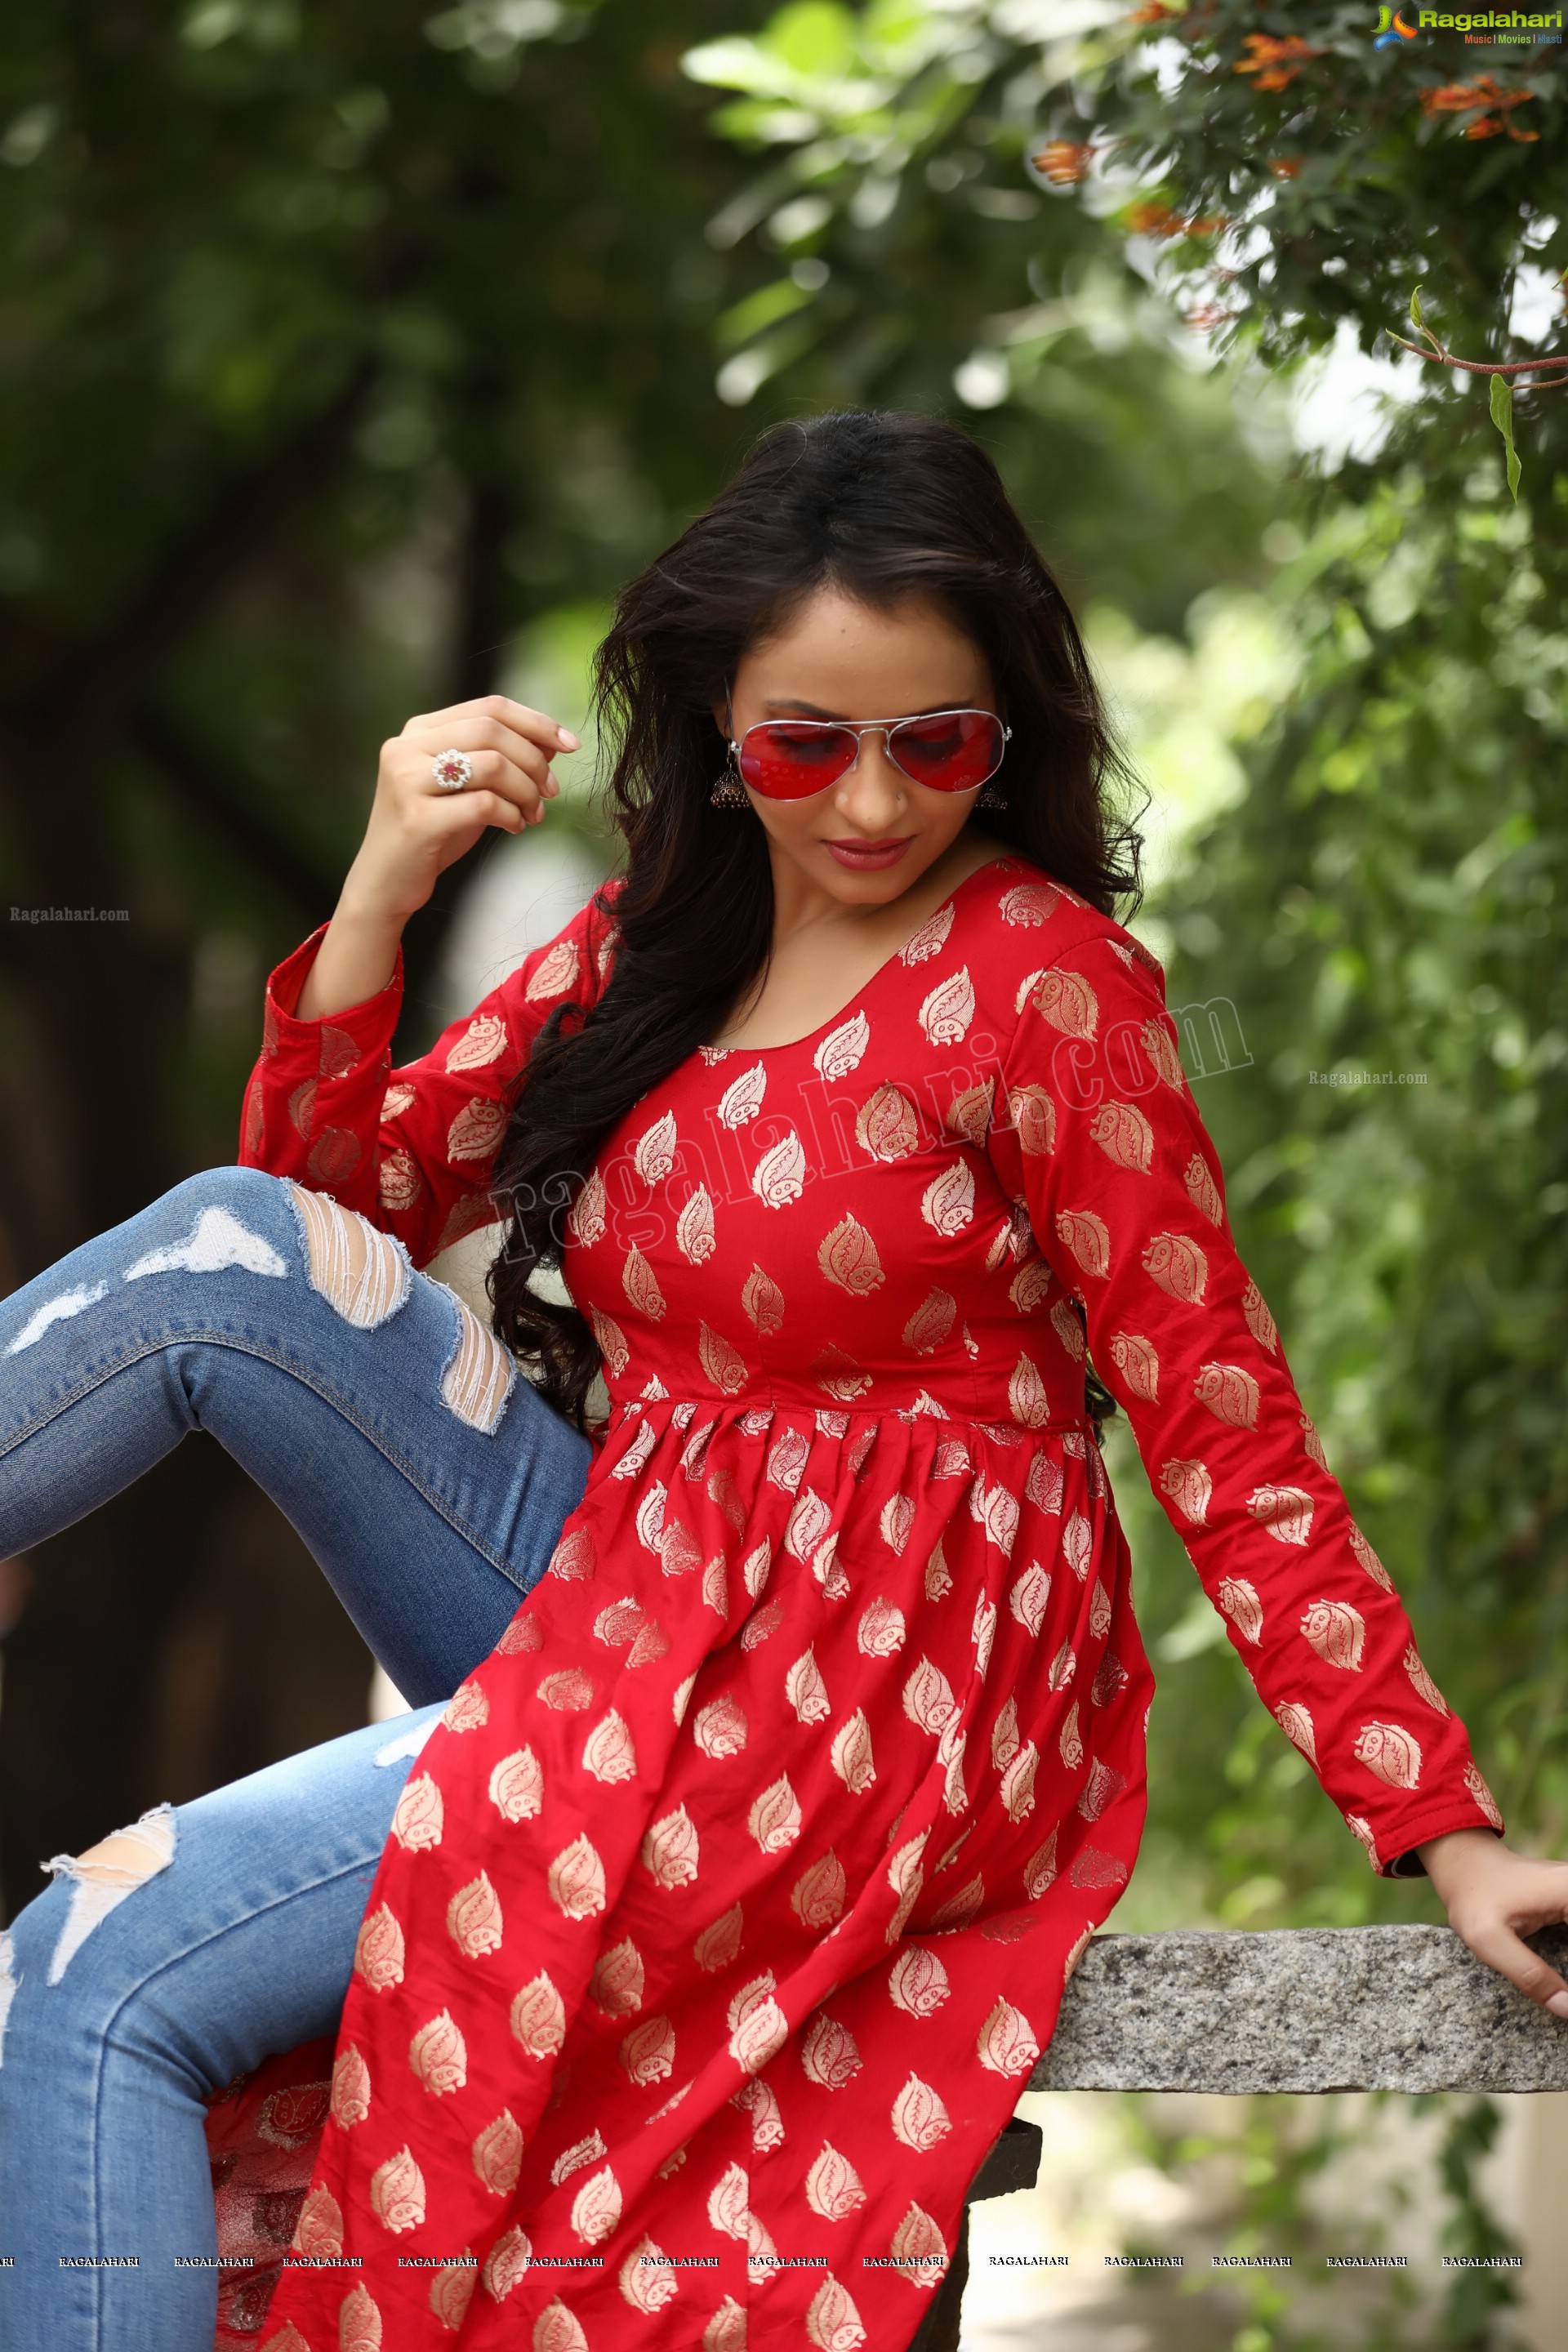 Khushboo Naaz (Exclusive Photo Shoot) (High Definition)